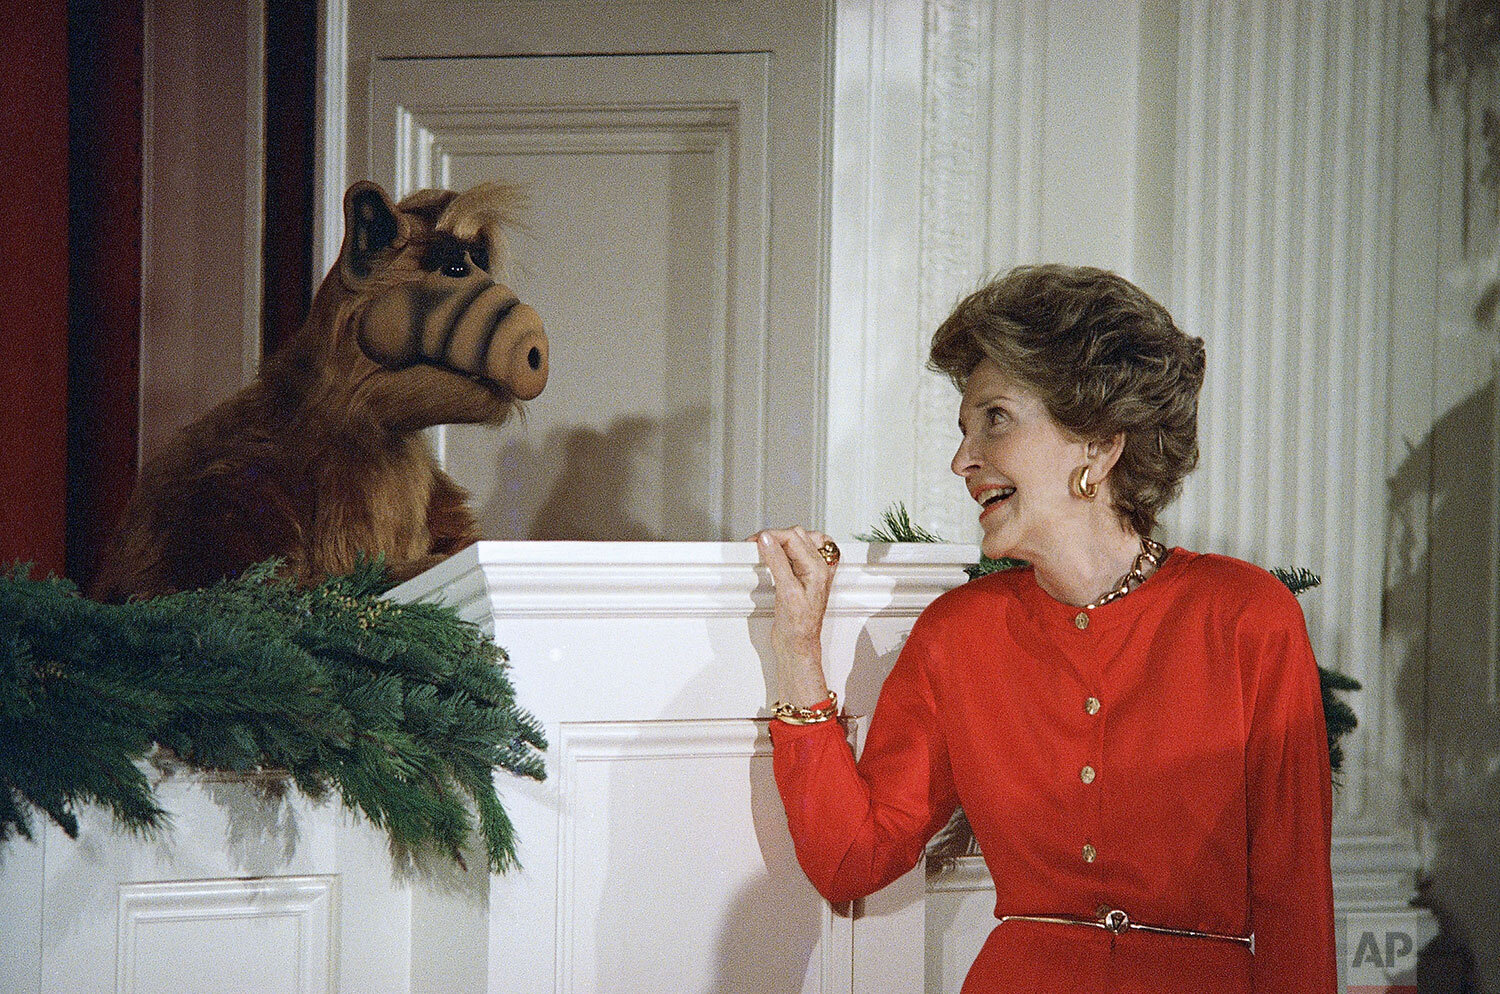  First lady Nancy Reagan glances towards ALF, an alien life form, during a Christmas party for Children of Washington's diplomatic corp at the White House Monday, Dec. 14, 1987. (AP Photo) 